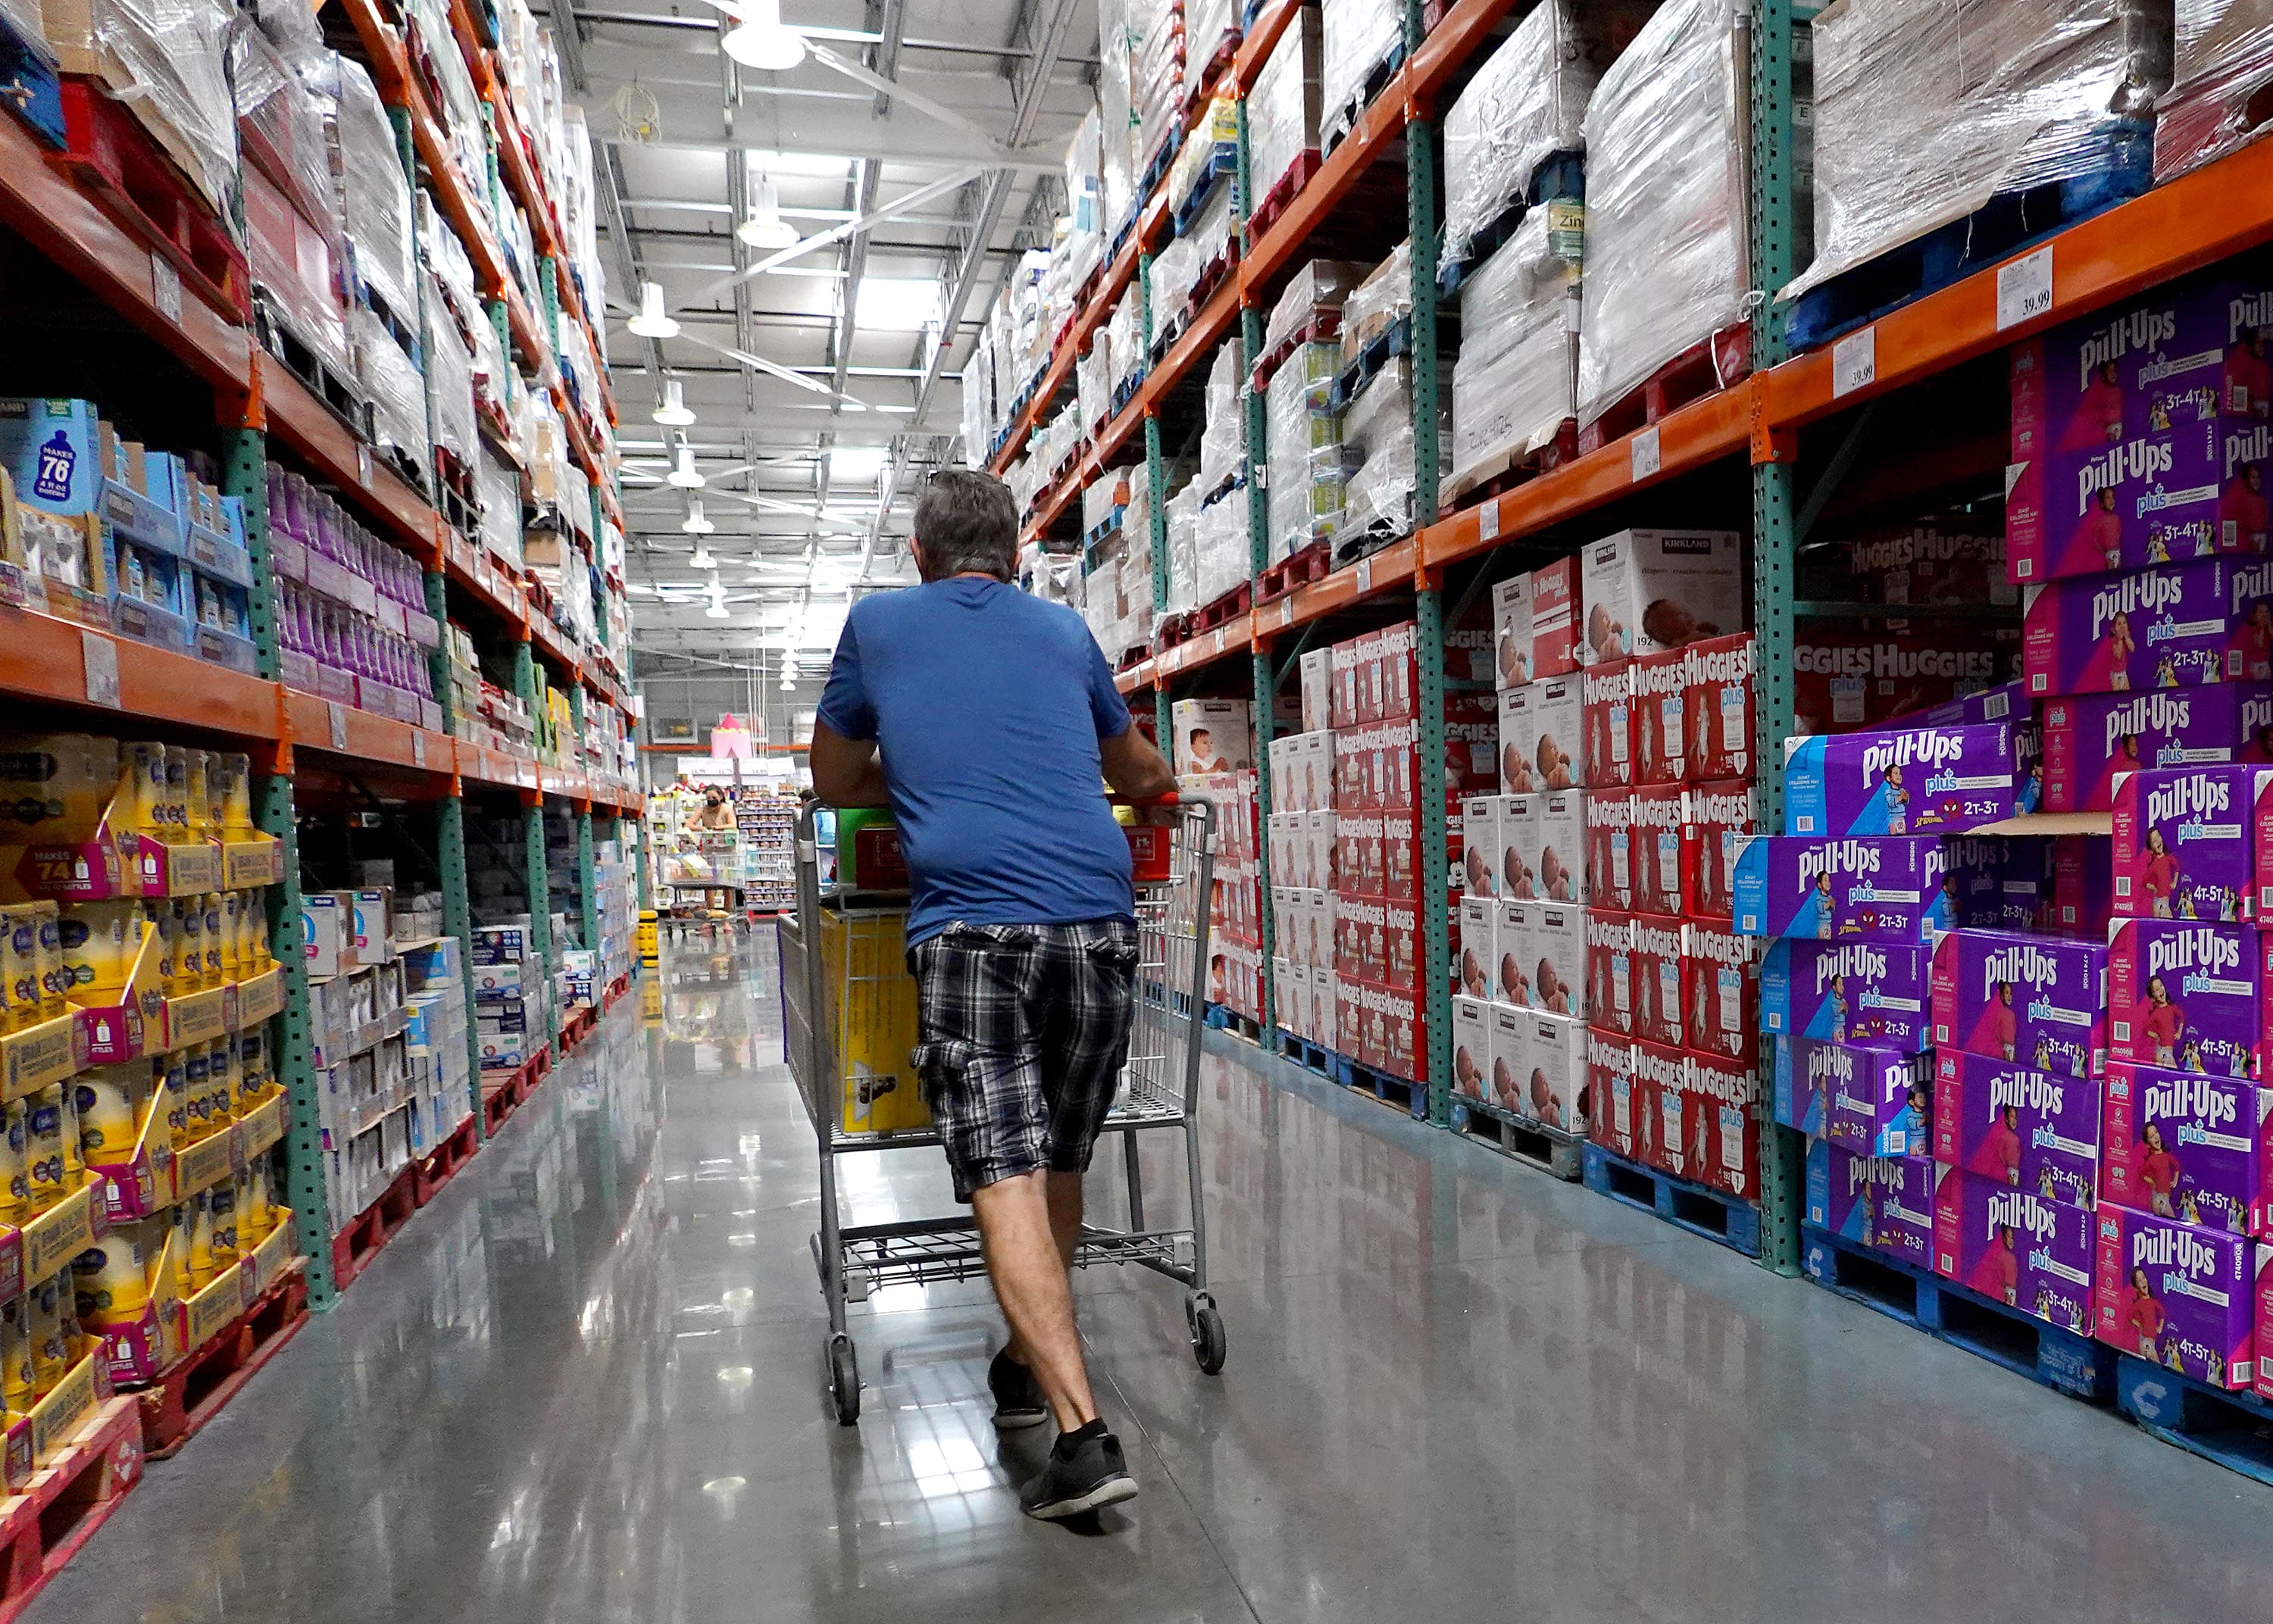 As consumer spending rises, Costco remains the discount retailer to own